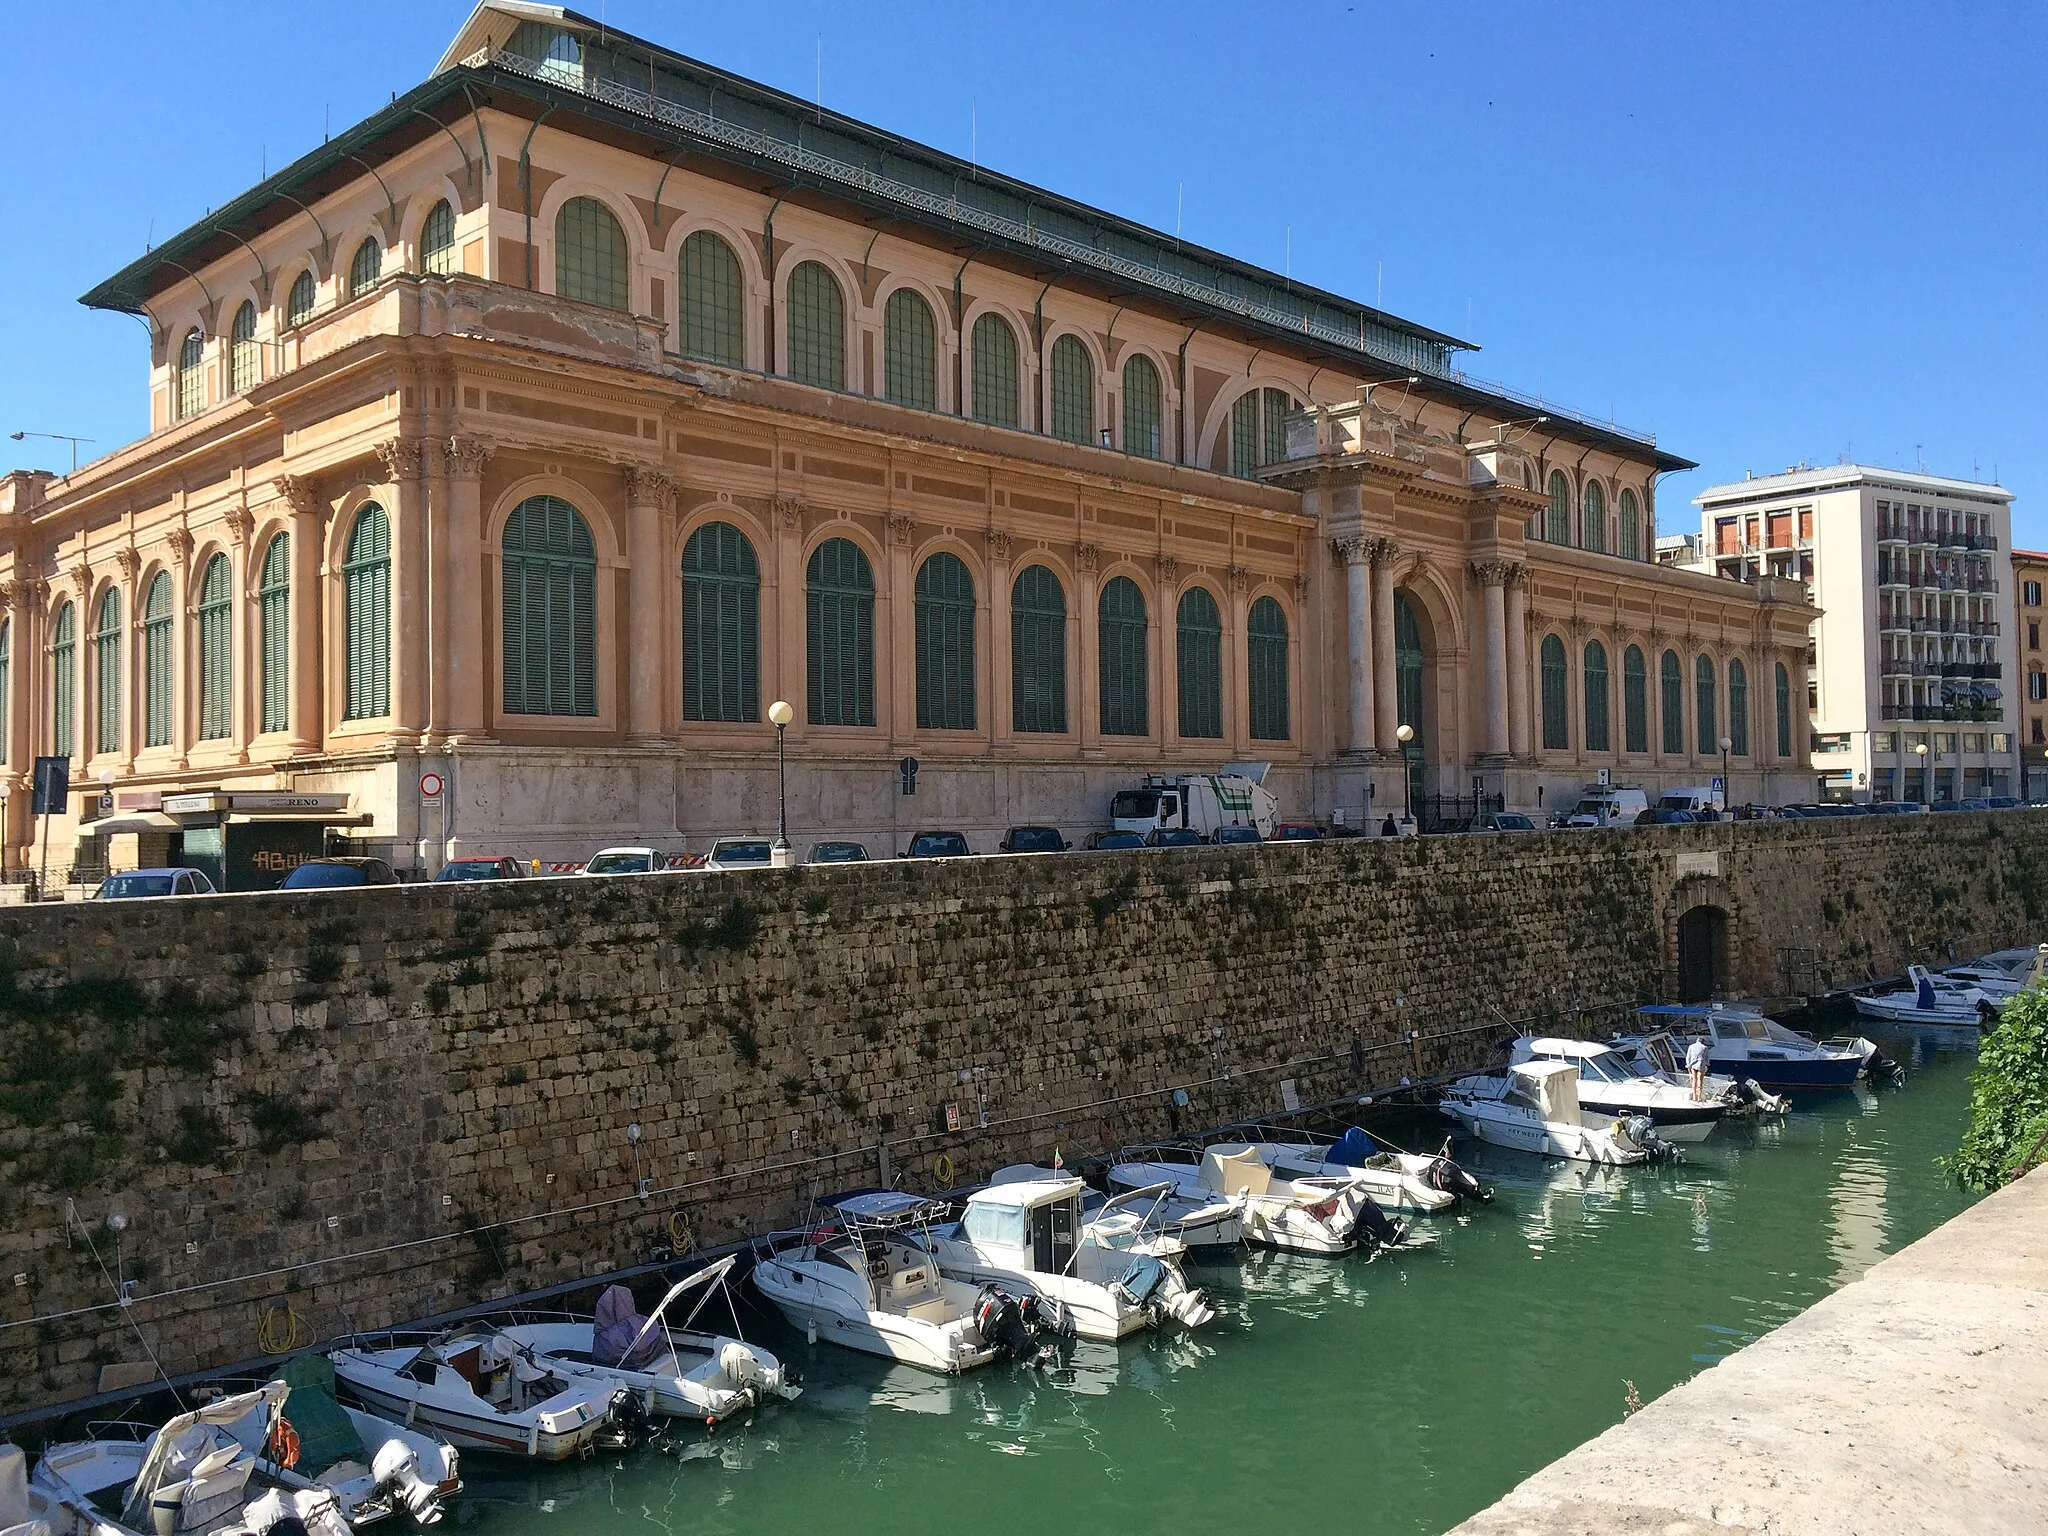 Photo showing: the central market building in Livorno